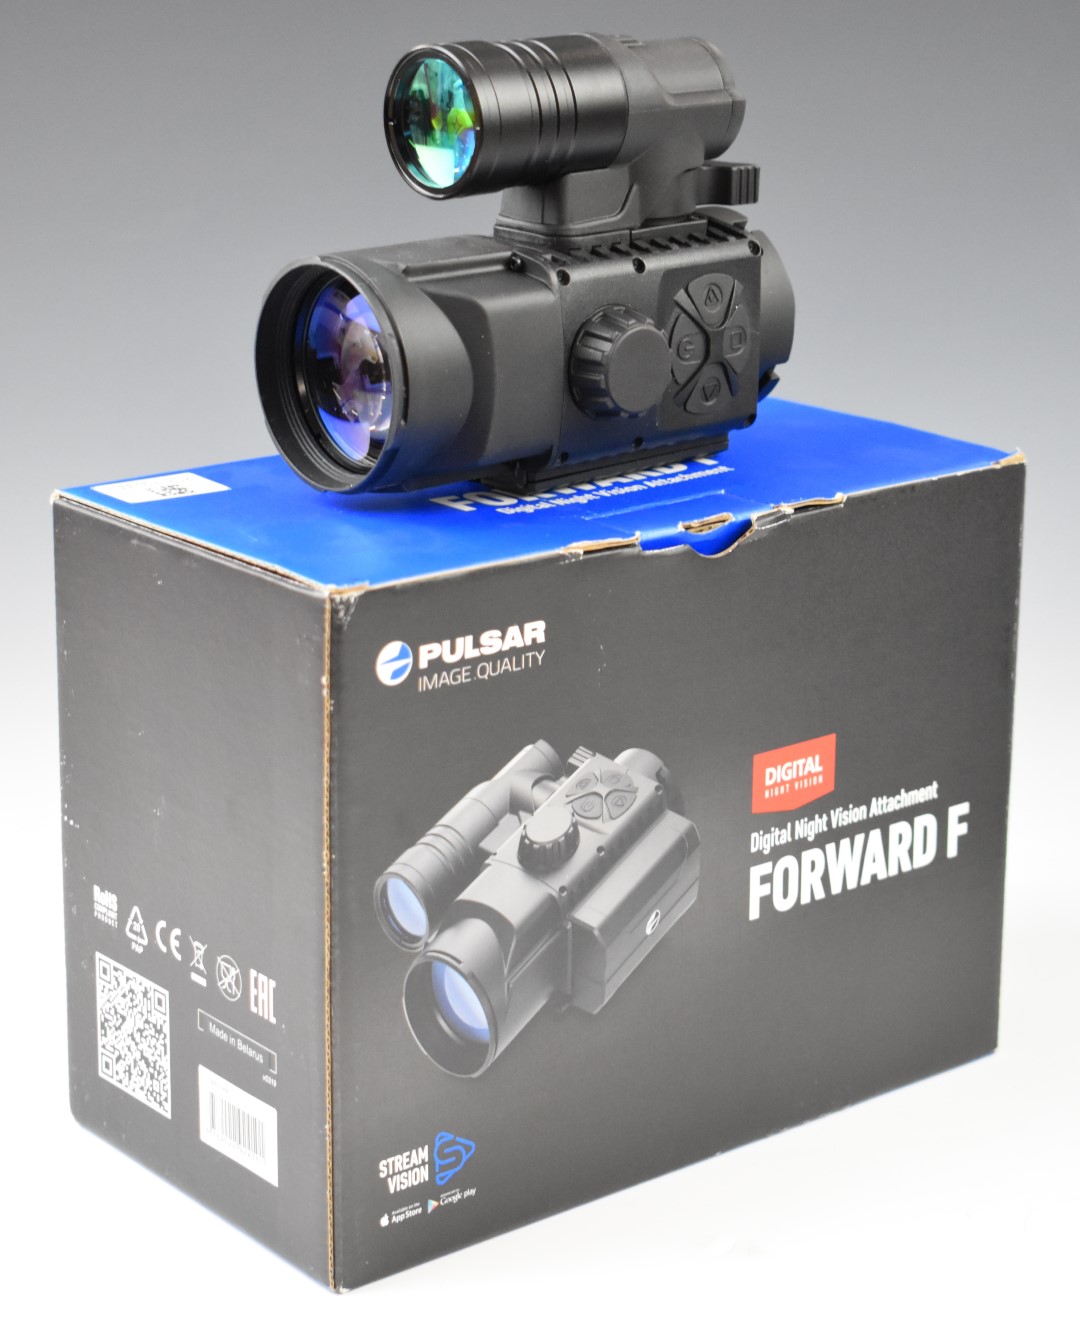 Pulsar Forward F455 digital night vision attachment to suit air rifle or similar scope, in